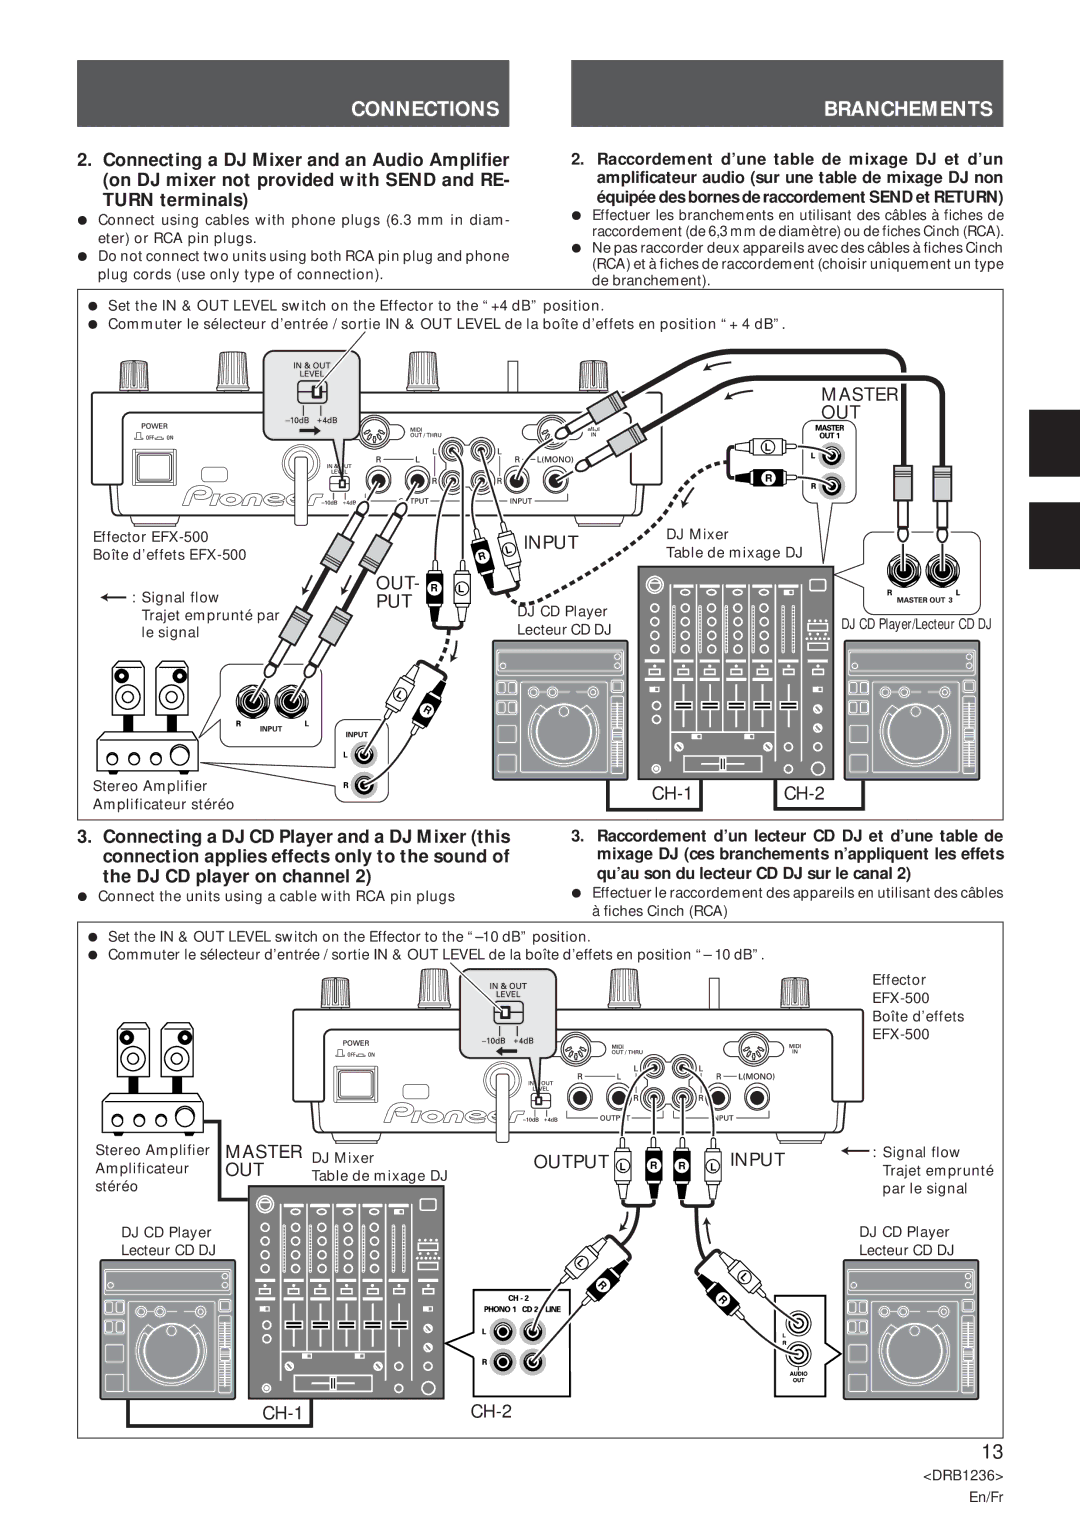 Pioneer Efx-500 operating instructions Connections Branchements, Out Put, CH-1 CH-2 